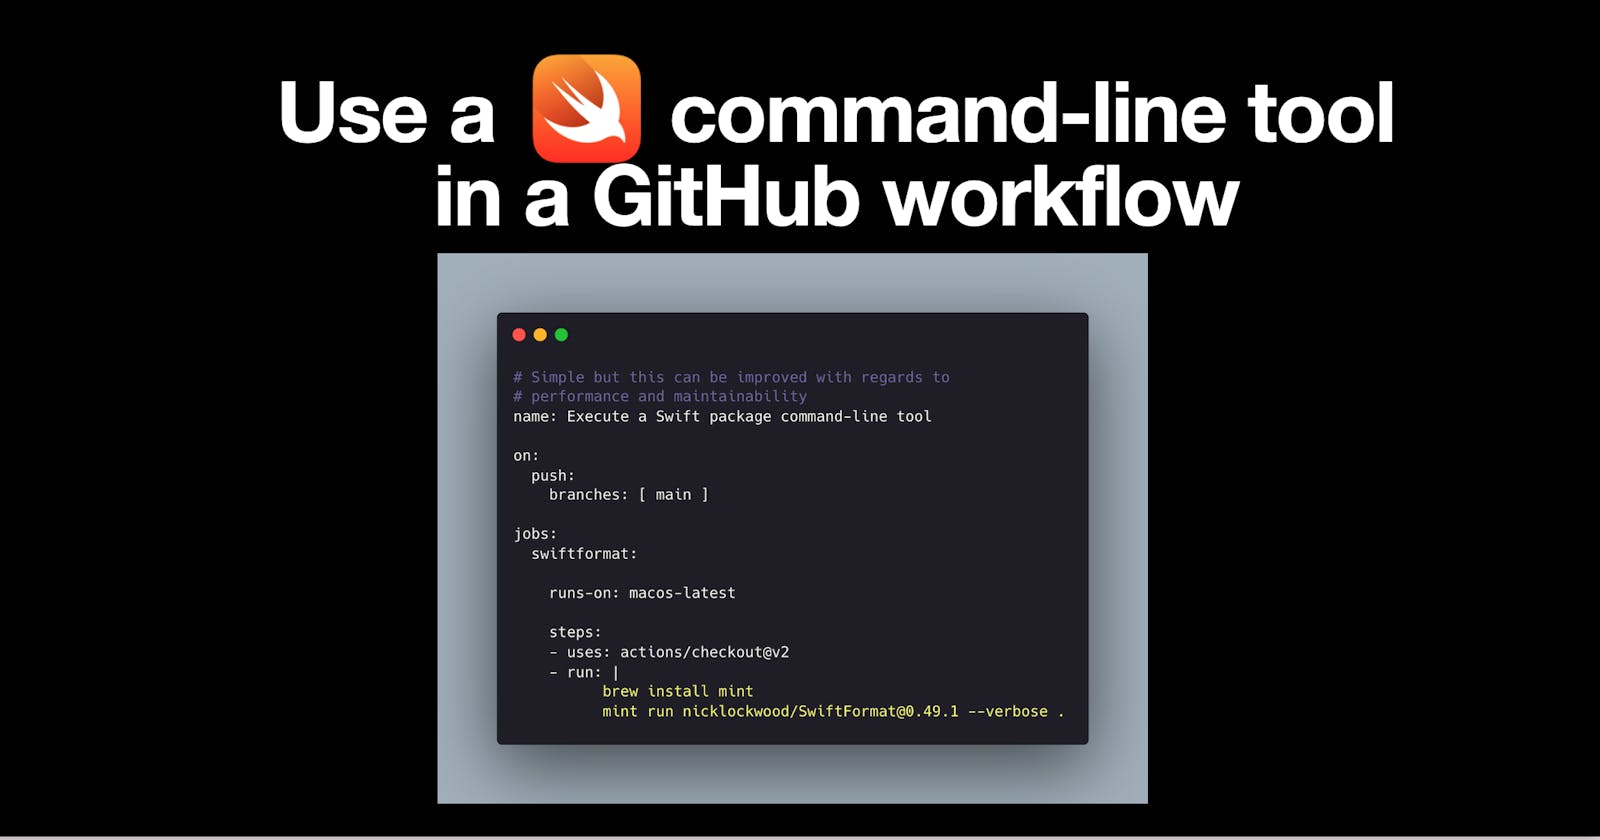 Use a Swift command-line tool in a GitHub workflow